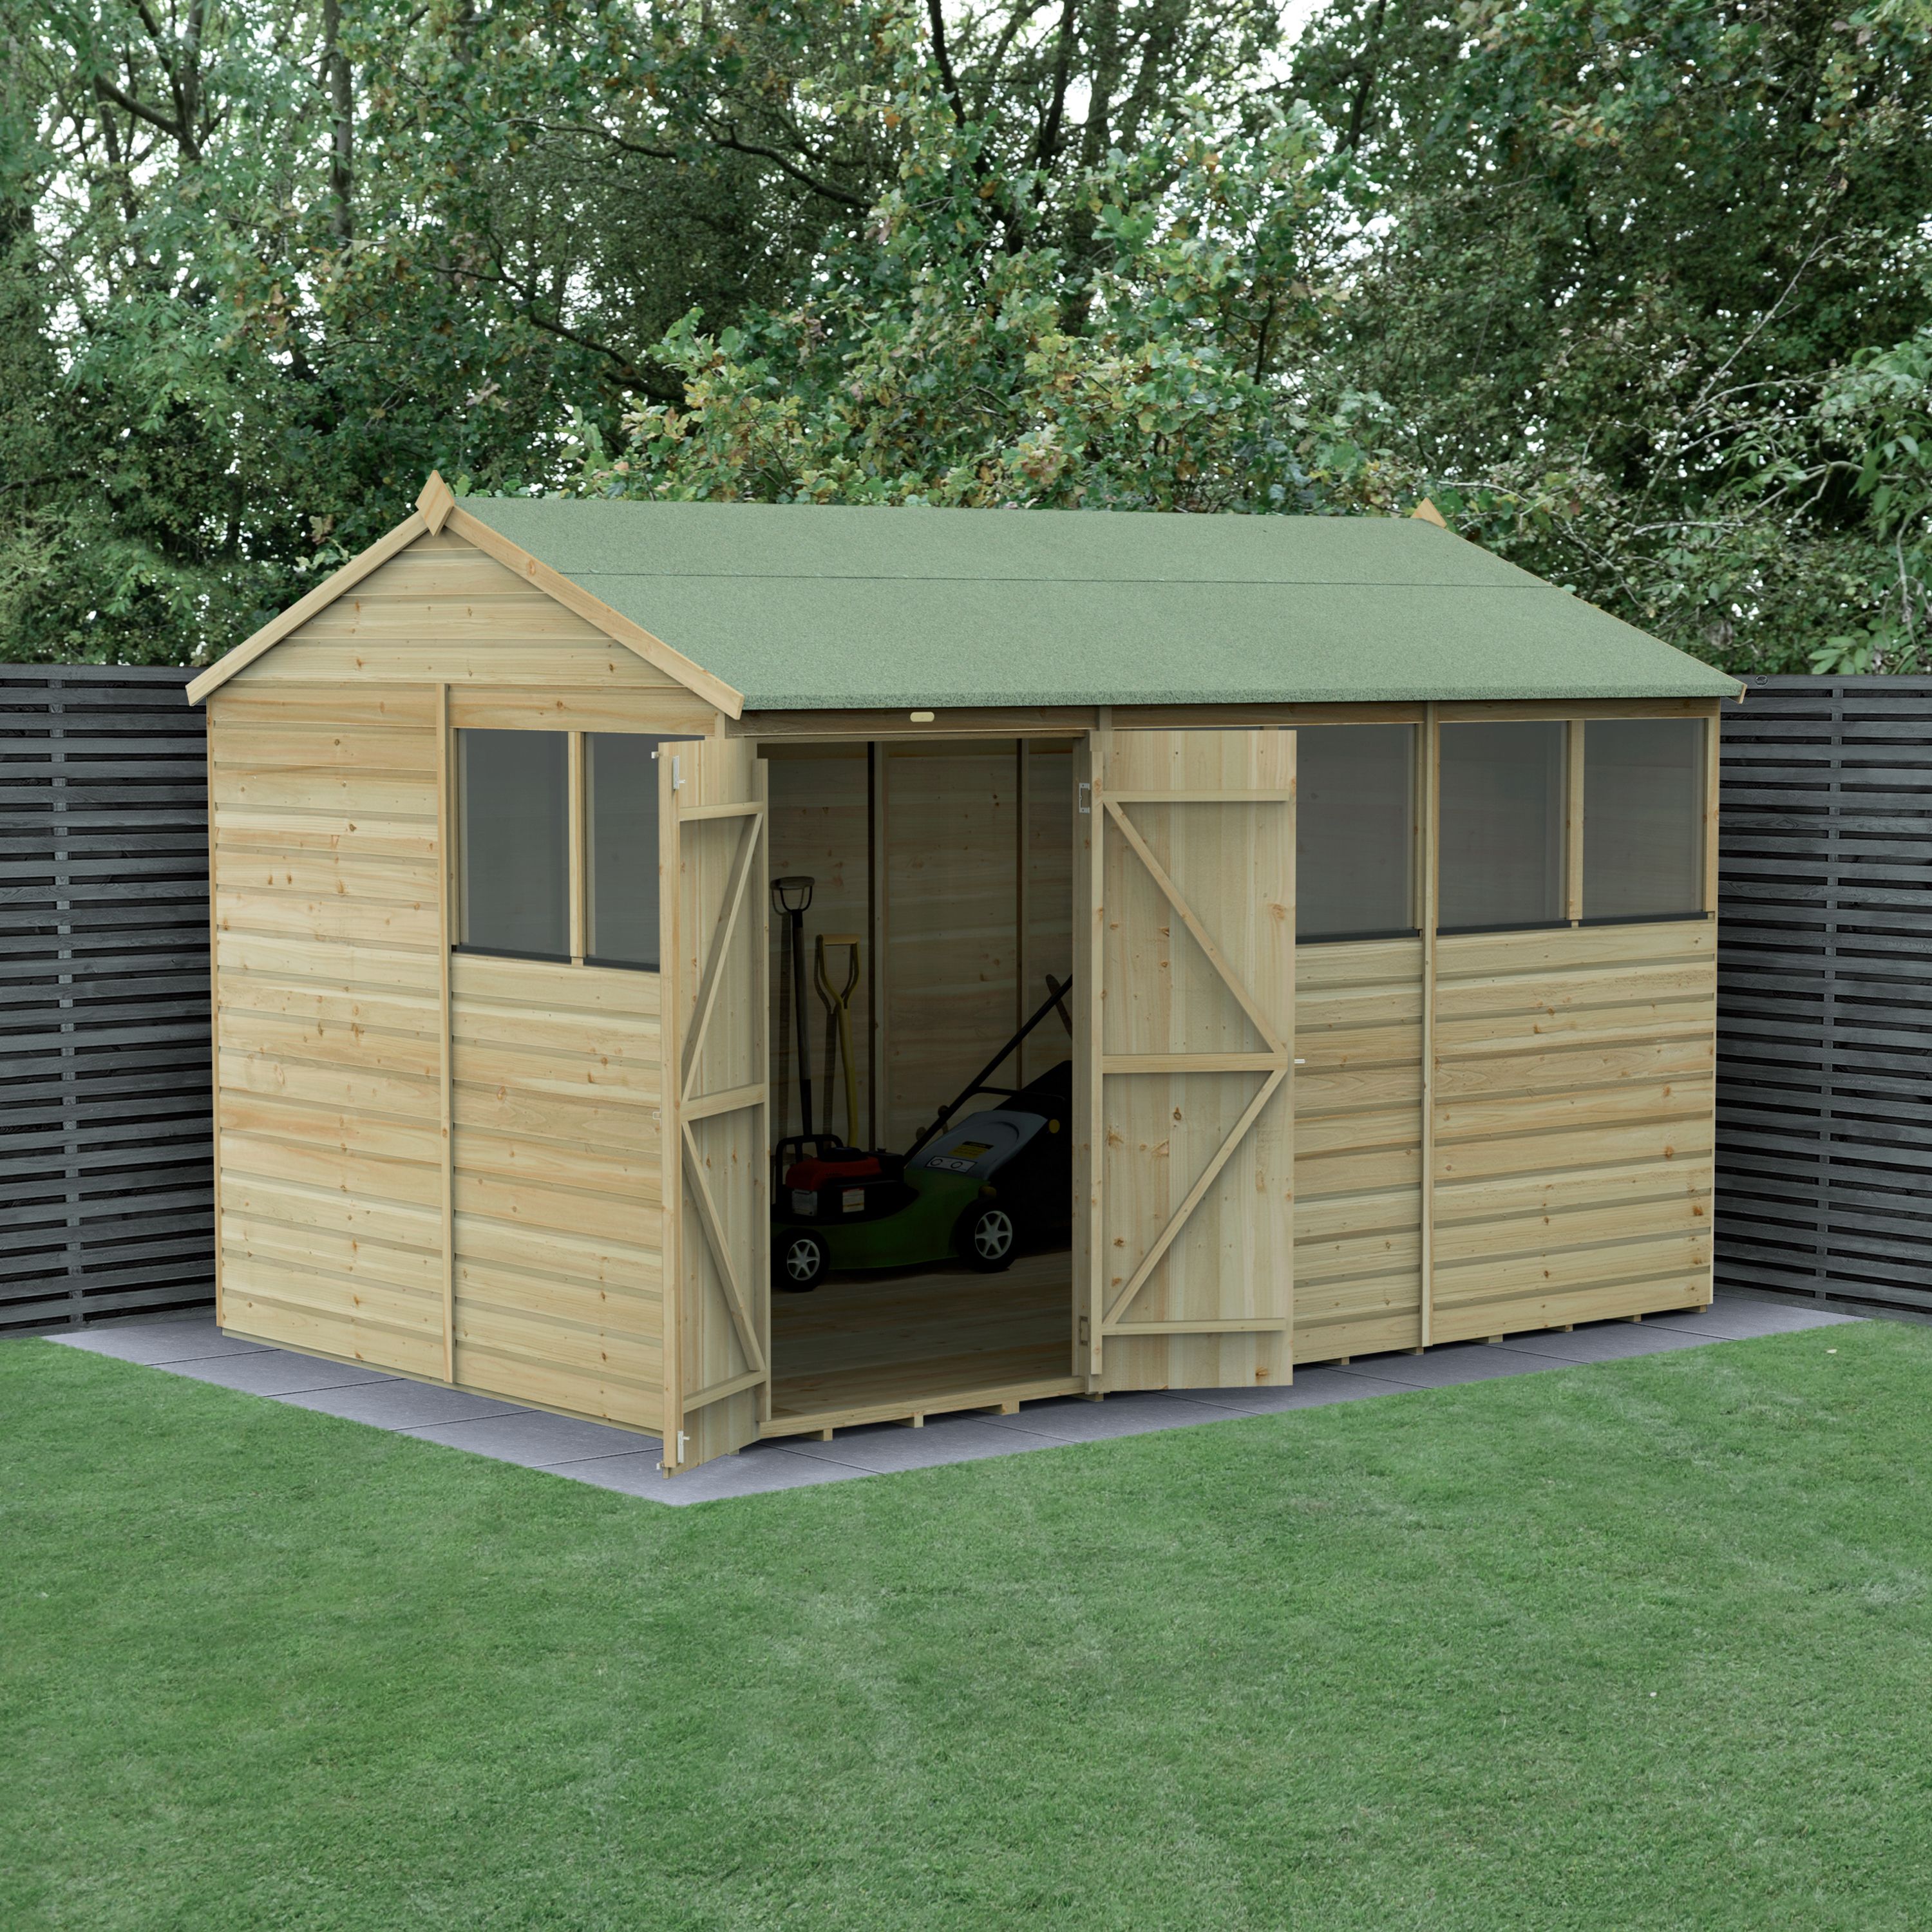 Forest Garden Beckwood Shiplap 12x8 ft Reverse apex Natural timber Wooden Pressure treated 2 door Shed with floor & 6 windows (Base included) - Assembly service included